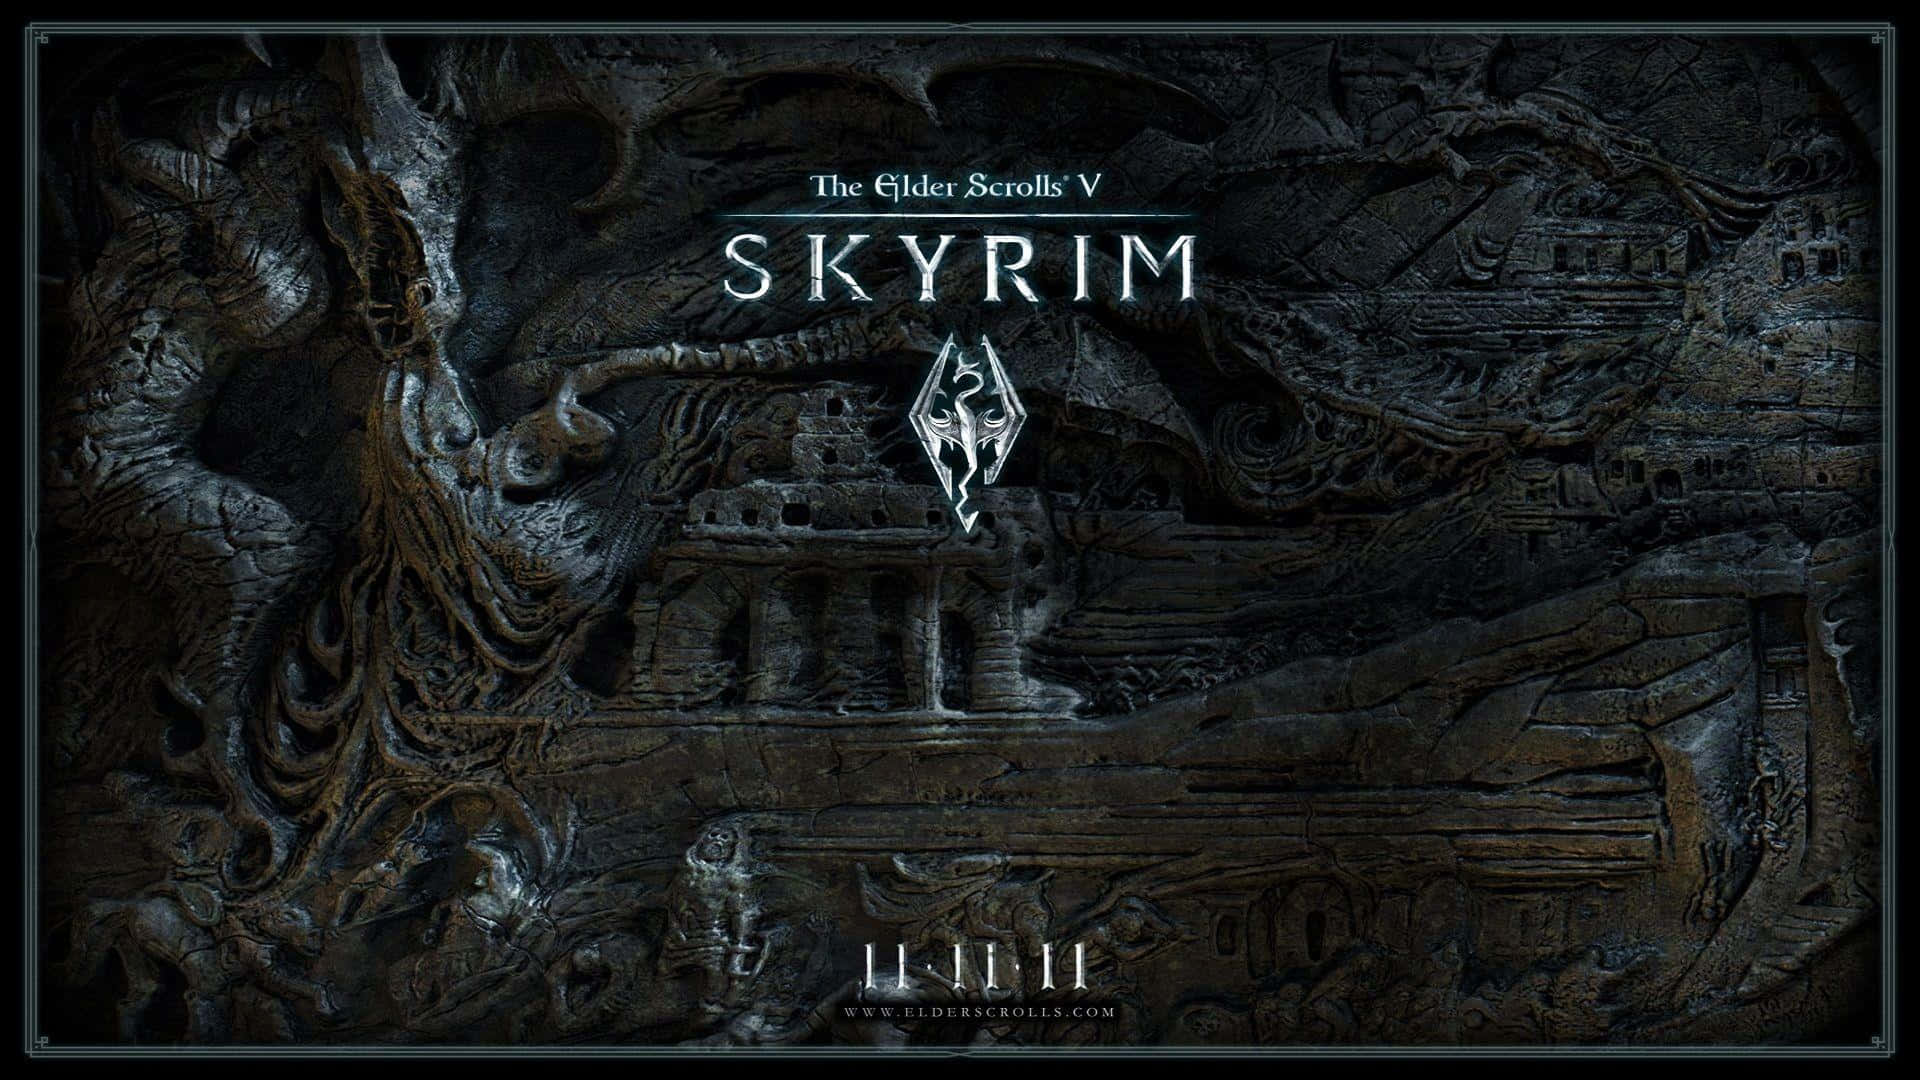 The mighty Dragonborn stands against an epic sky, the winds of destiny shaping the world of The Elder Scrolls V: Skyrim